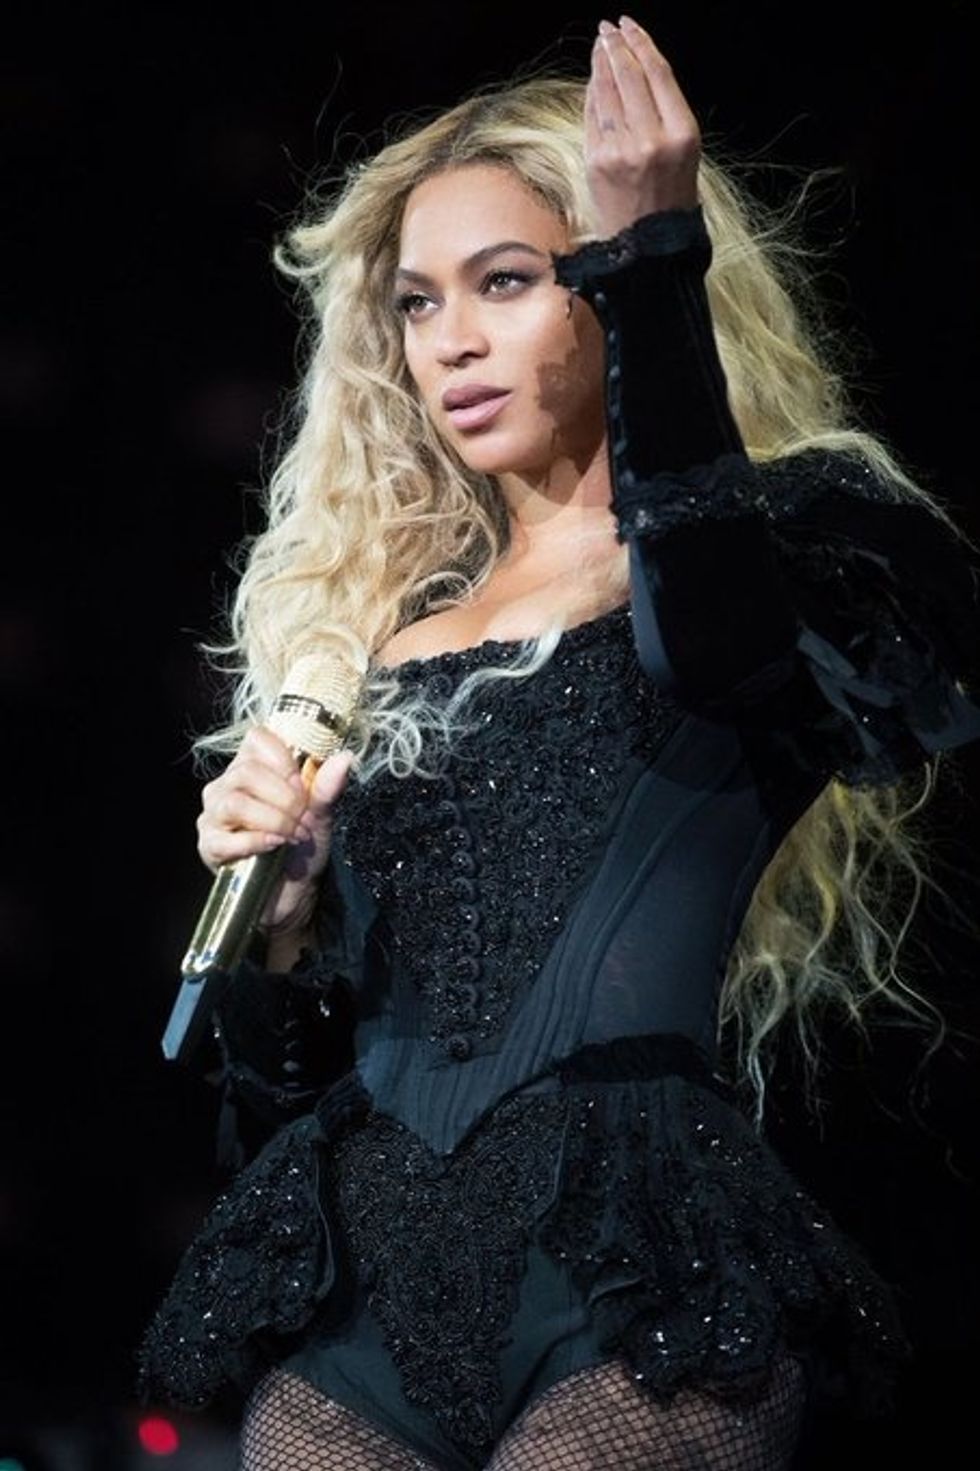 The Definitive Ranking of ALL Of Beyoncé's Albums